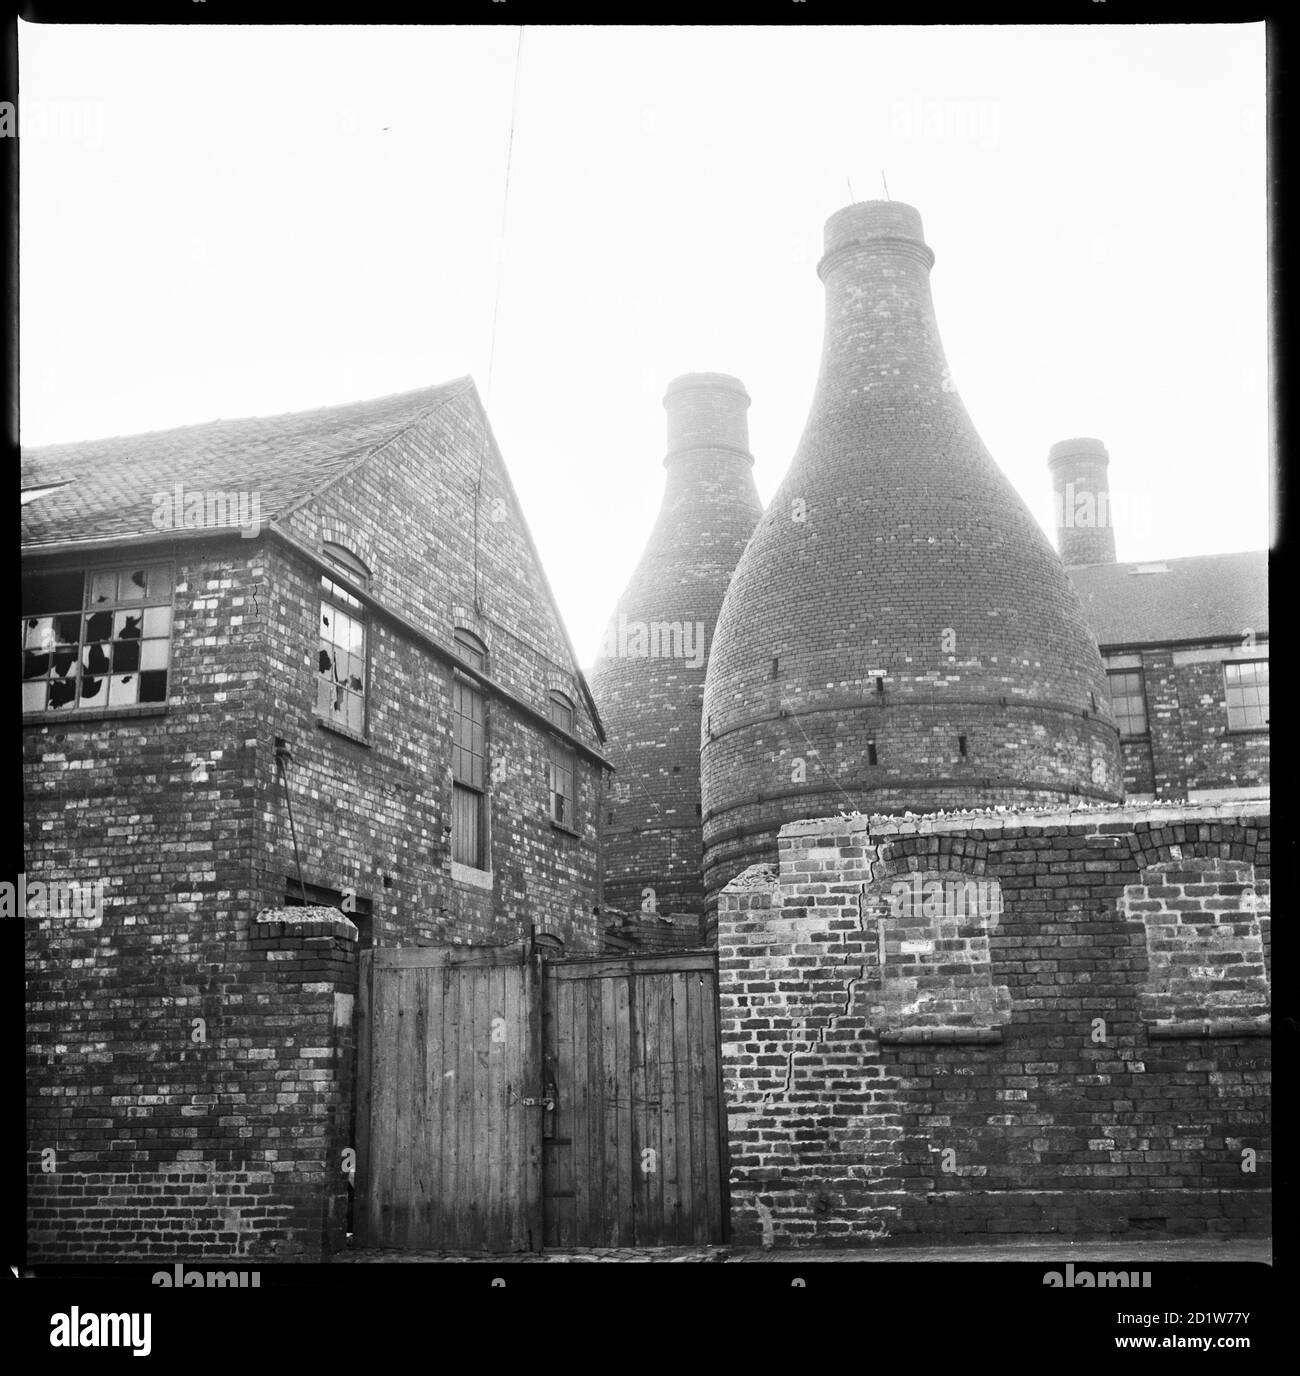 Bottle kilns at a derelict pottery works, Stoke-on-Trent, Staffordshire, UK. Stock Photo